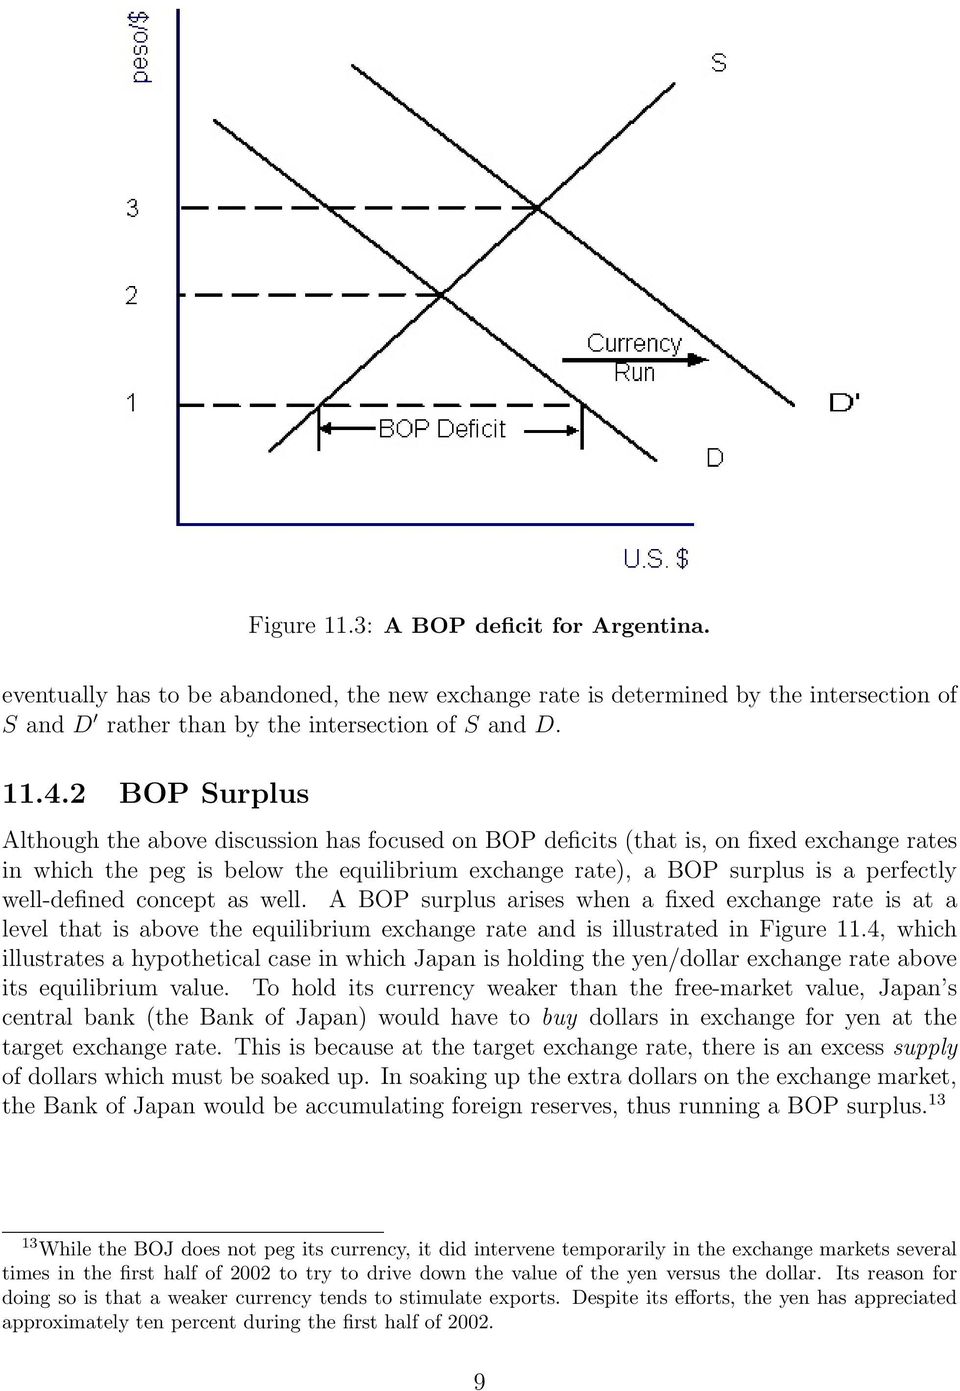 well-defined concept as well. A BOP surplus arises when a fixed exchange rate is at a level that is above the equilibrium exchange rate and is illustrated in Figure 11.